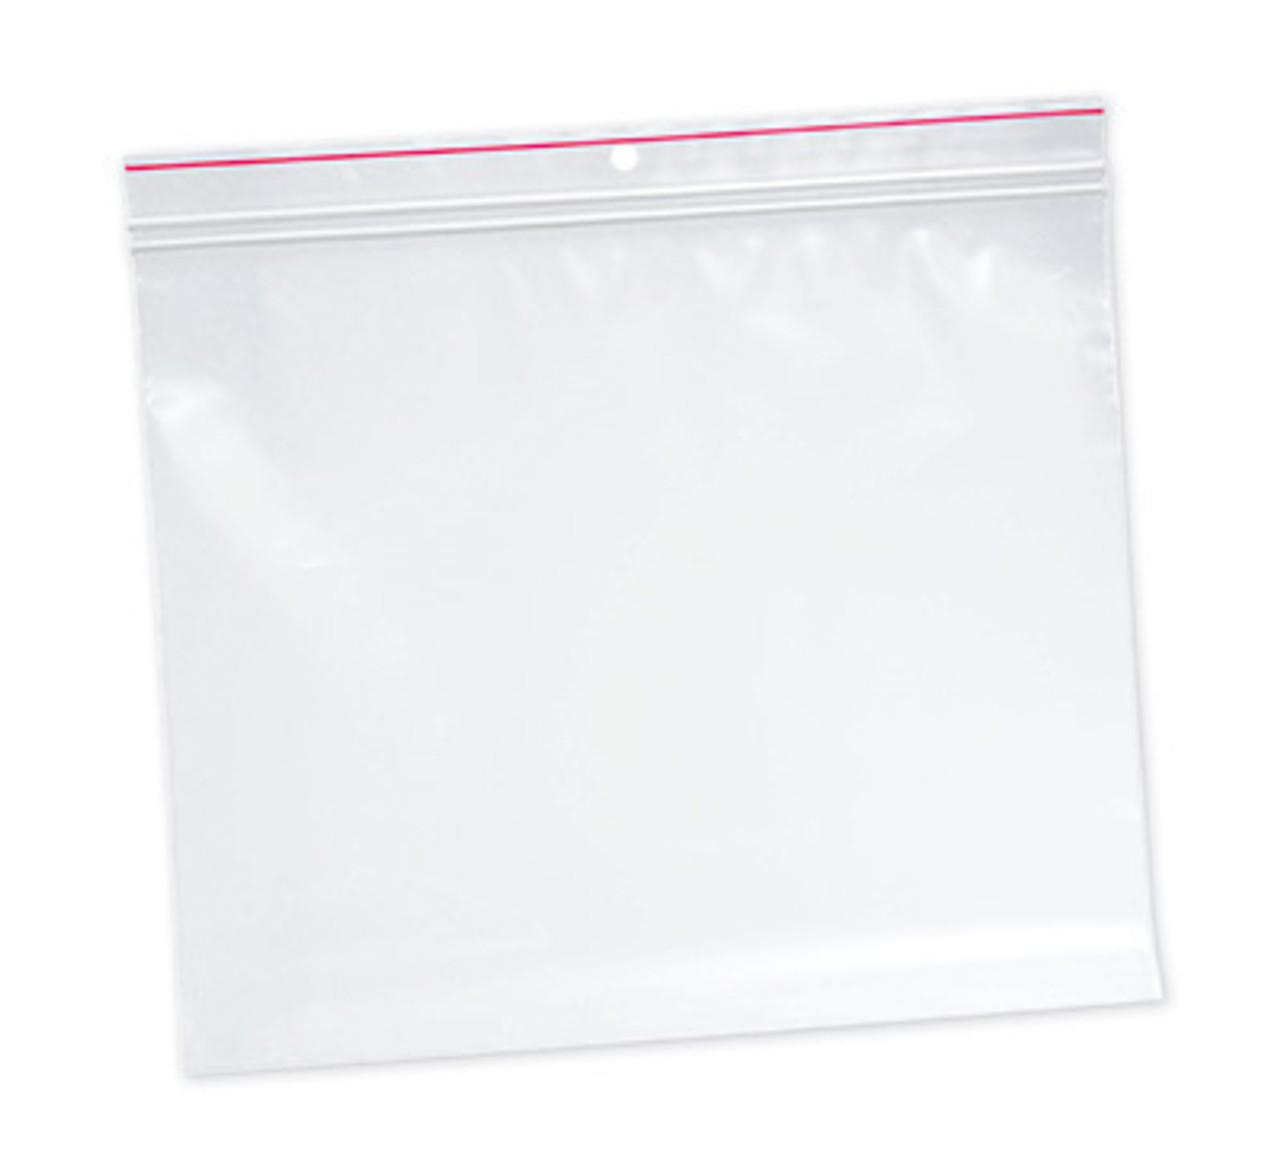 10" x 12" Minigrip Red Line Double Zipper Bag with Hang Hole (4 mil) (Qty) 500 Items